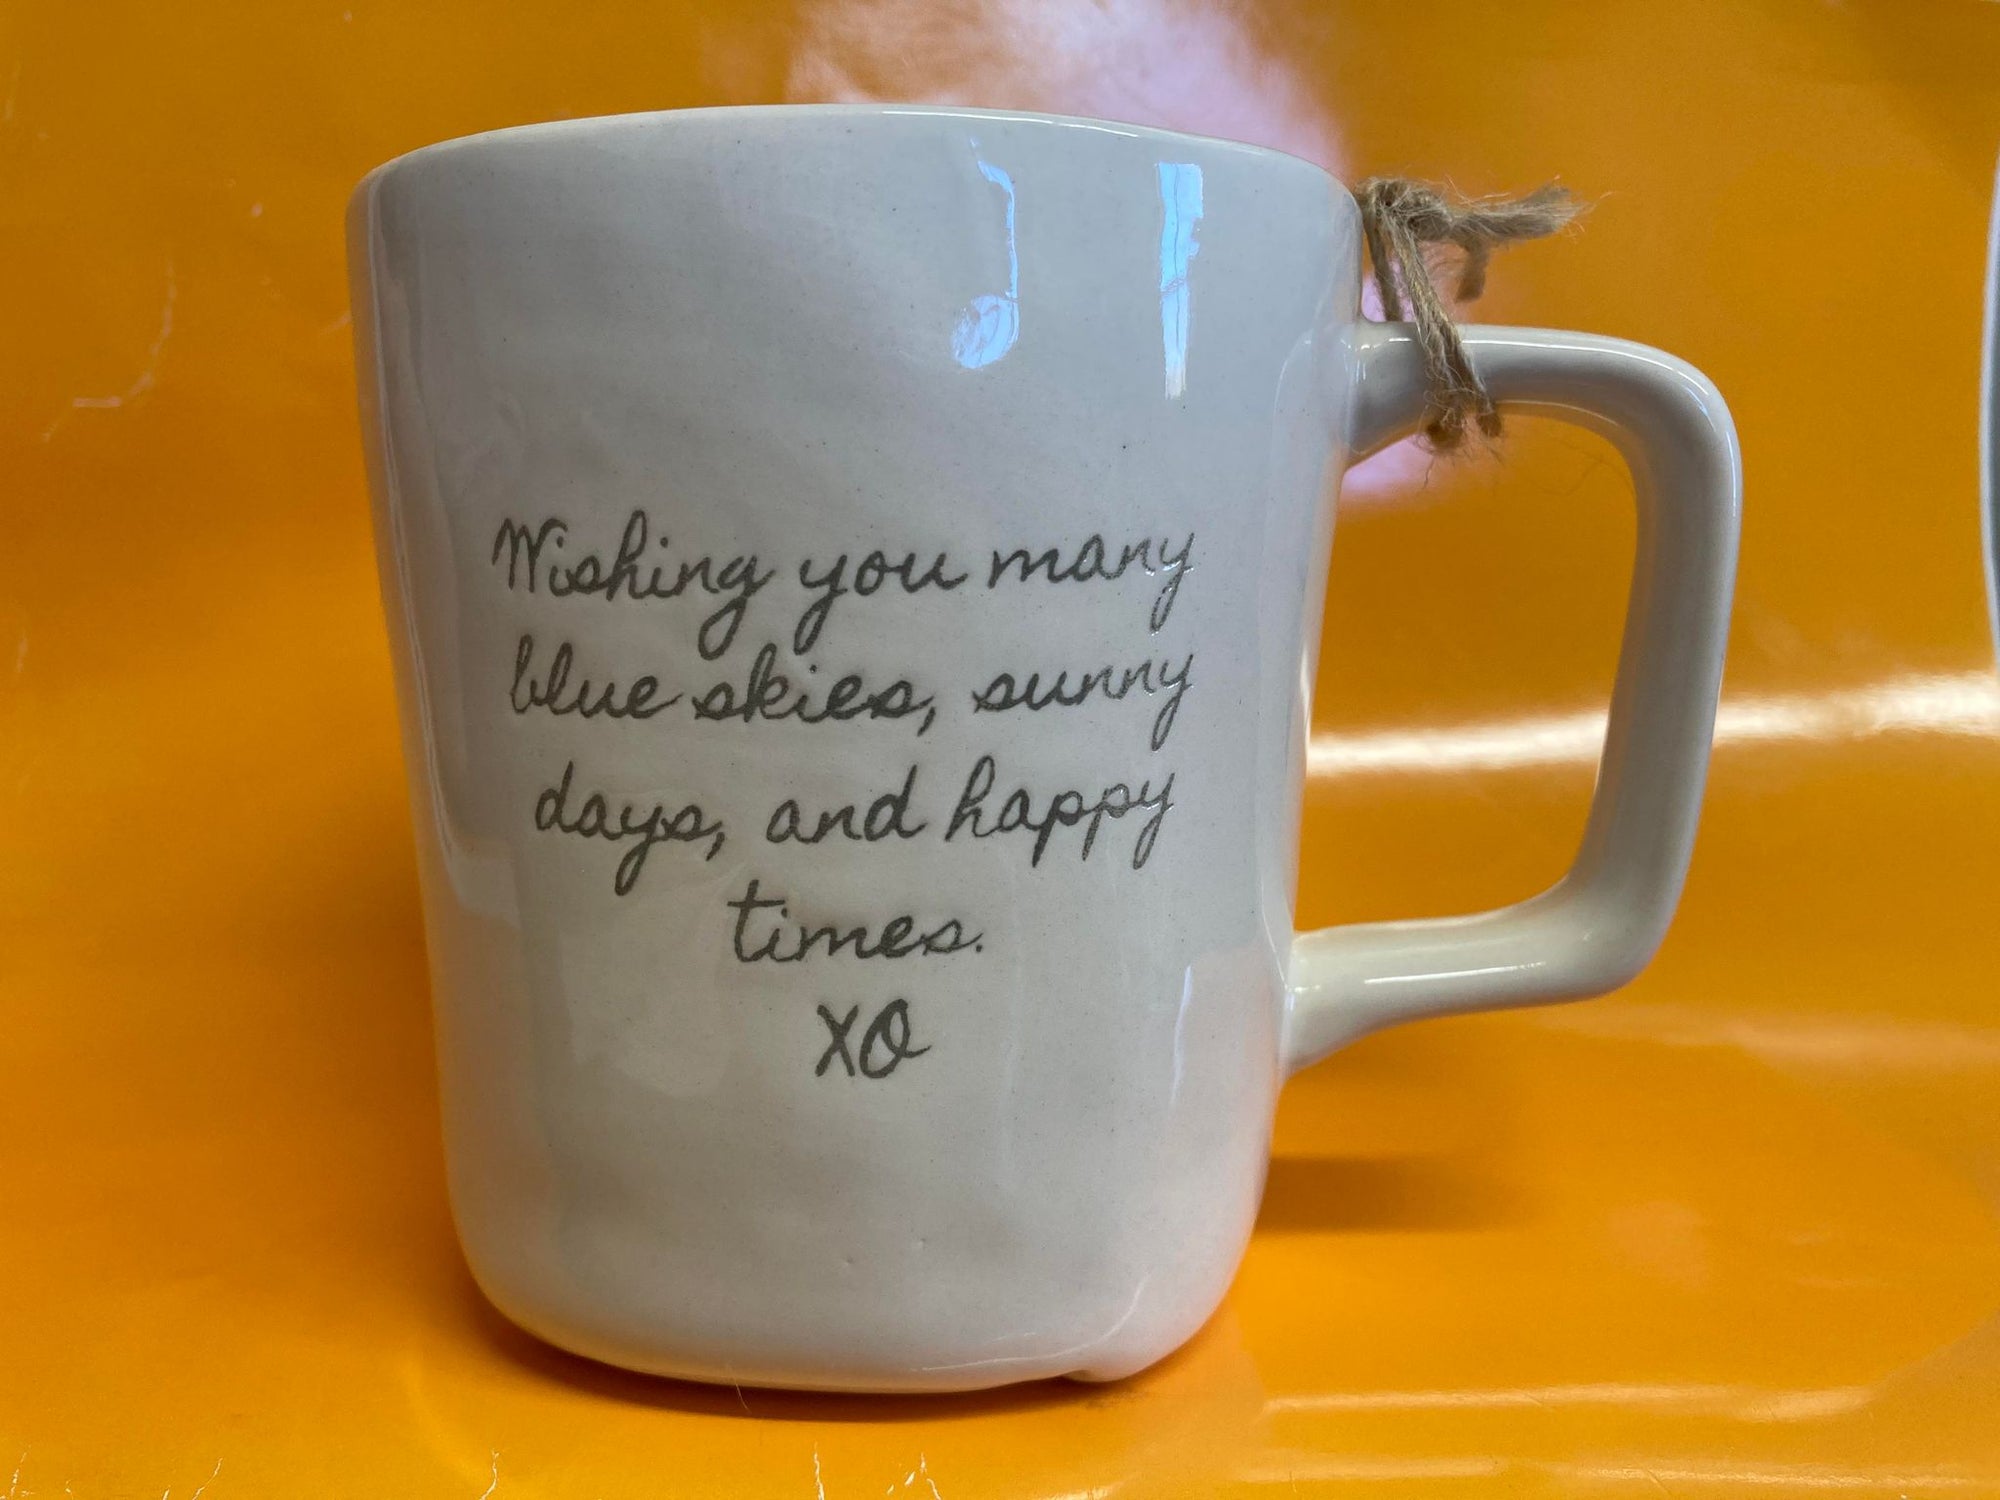 A Studio M Coffee Mug from the Heart Notes collection, featuring the words "making you many blues away days and happy times.